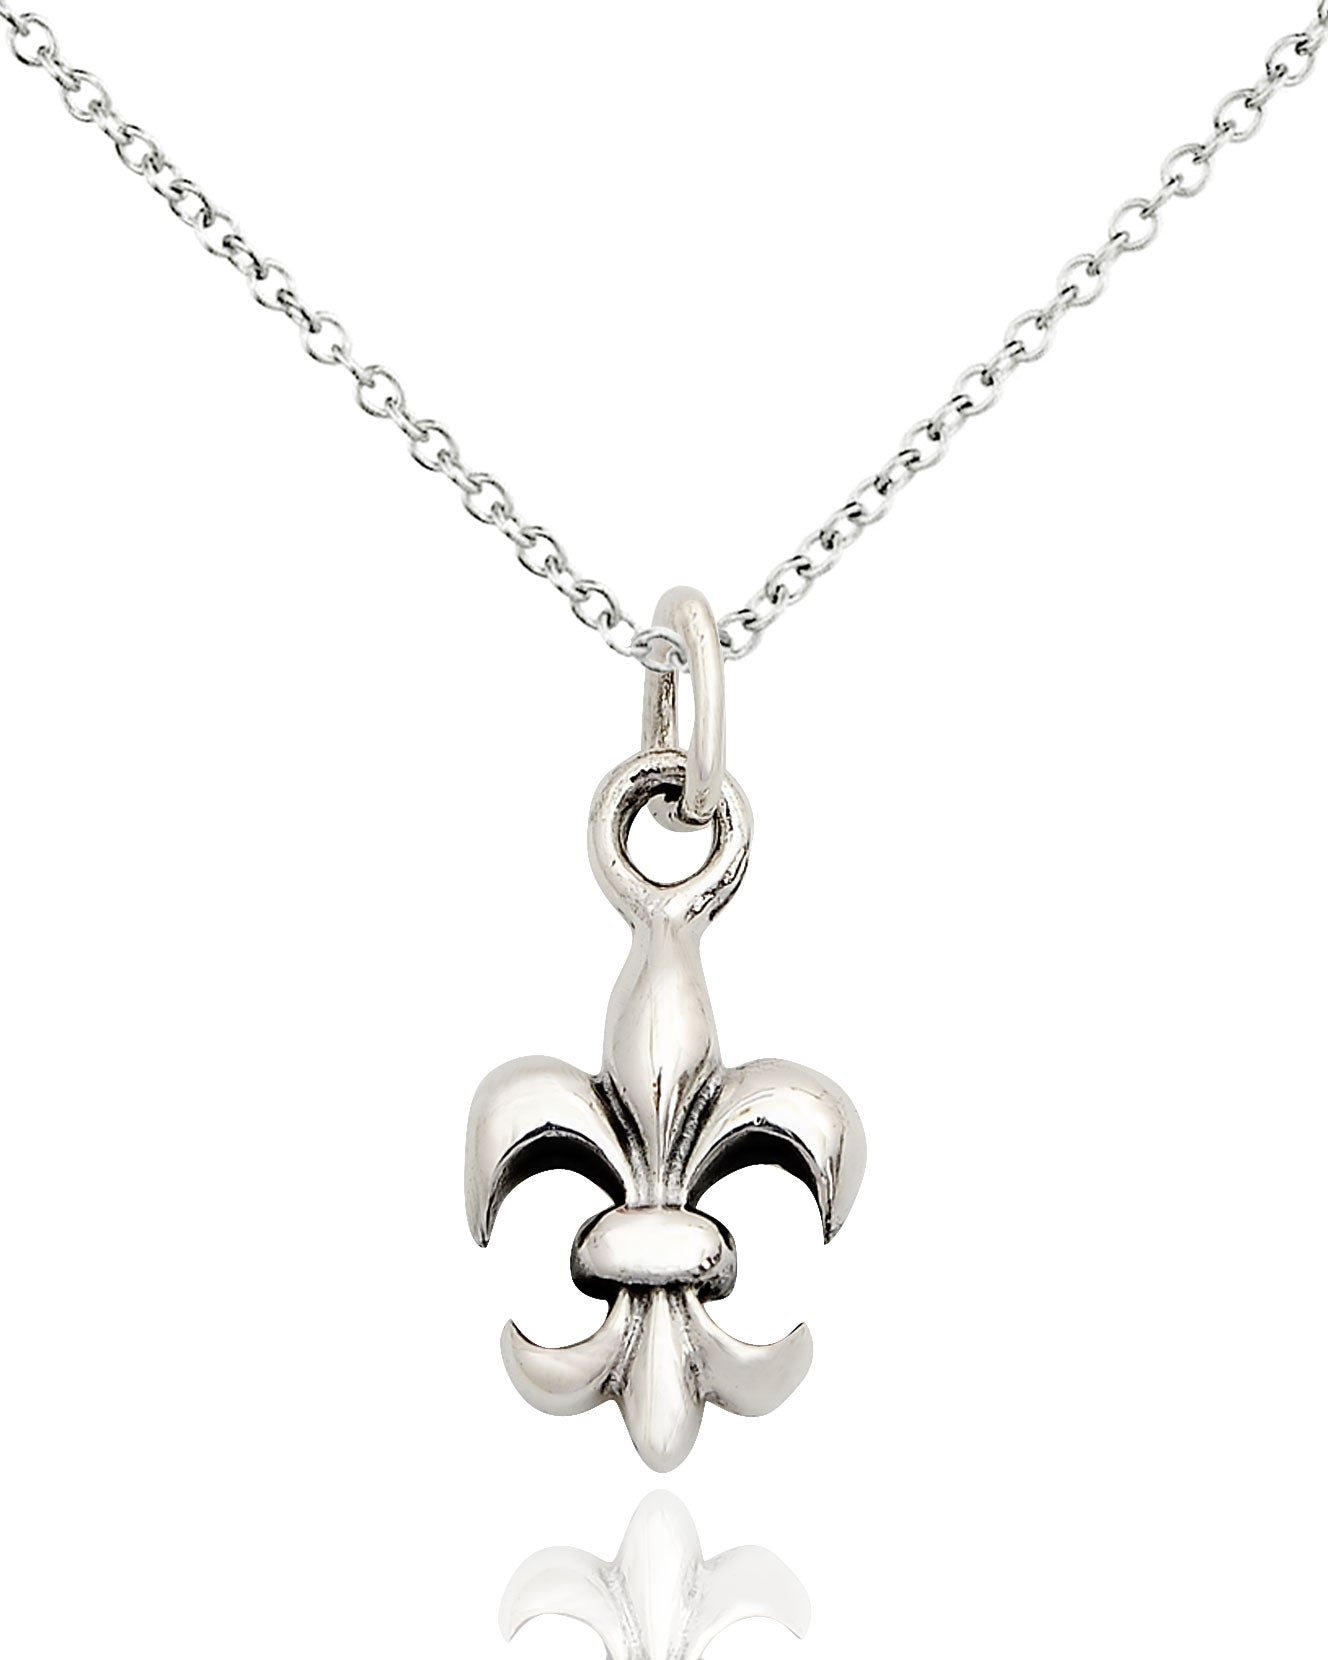 French Fleur De Lis 92.5 Sterling Silver Gold Brass Necklace Pendant Jewelry